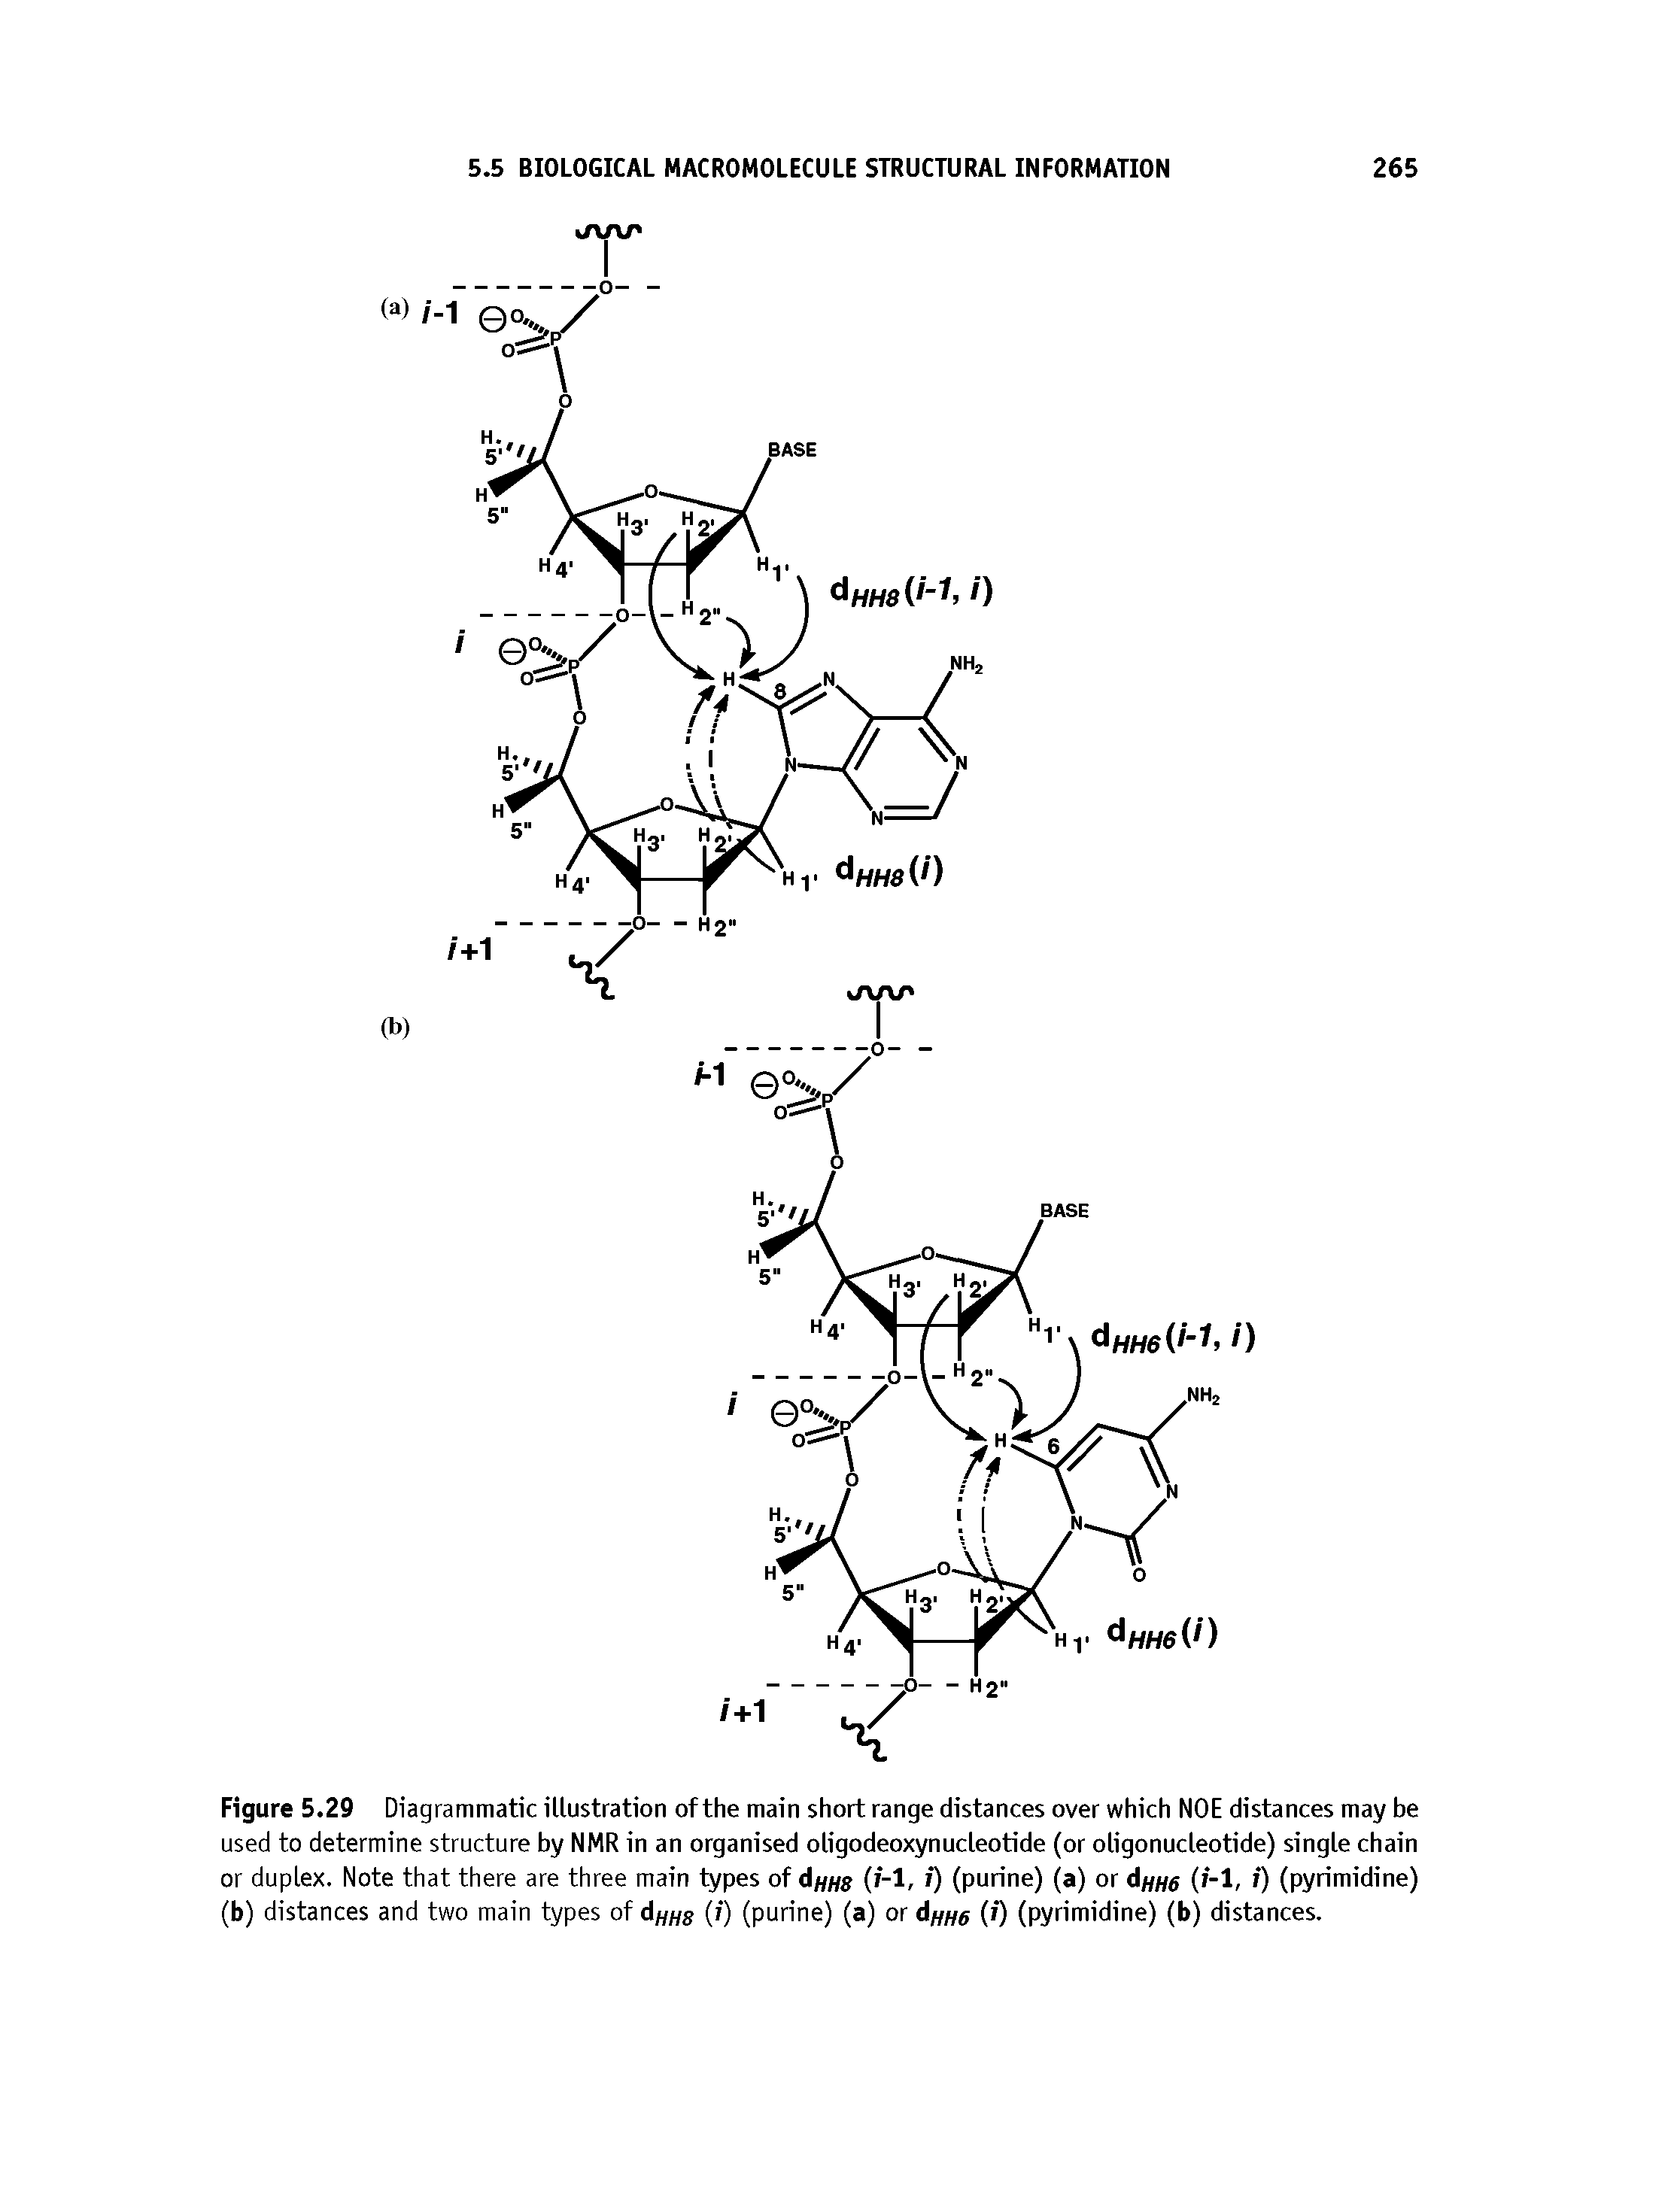 Figure 5.29 Diagrammatic illustration of the main short range distances over which NOE distances may be used to determine structure by NMR in an organised oligodeoxynucleob de (or oligonucleotide) single chain or duplex. Note that there are three main types of d////g (i-l, i) (purine) (a) or d////g (i-1, i) (pyrimidine) (b) distances and two main types of (inns (0 (purine) (a) or Ahh6 (0 (pyrimidine) (b) distances.